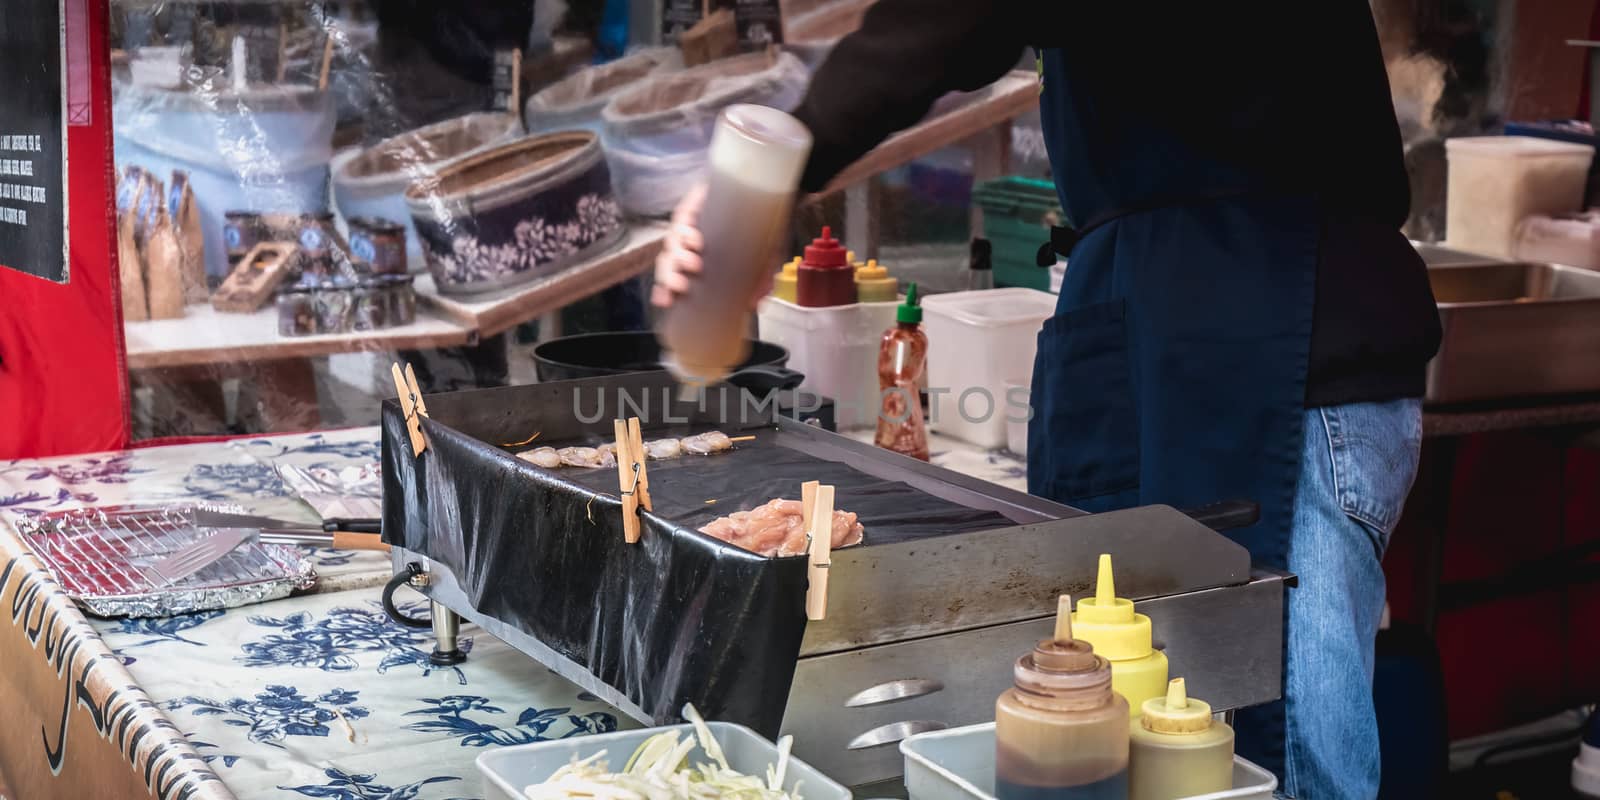 Live food stall where a cook prepares a meal in front of his cli by AtlanticEUROSTOXX